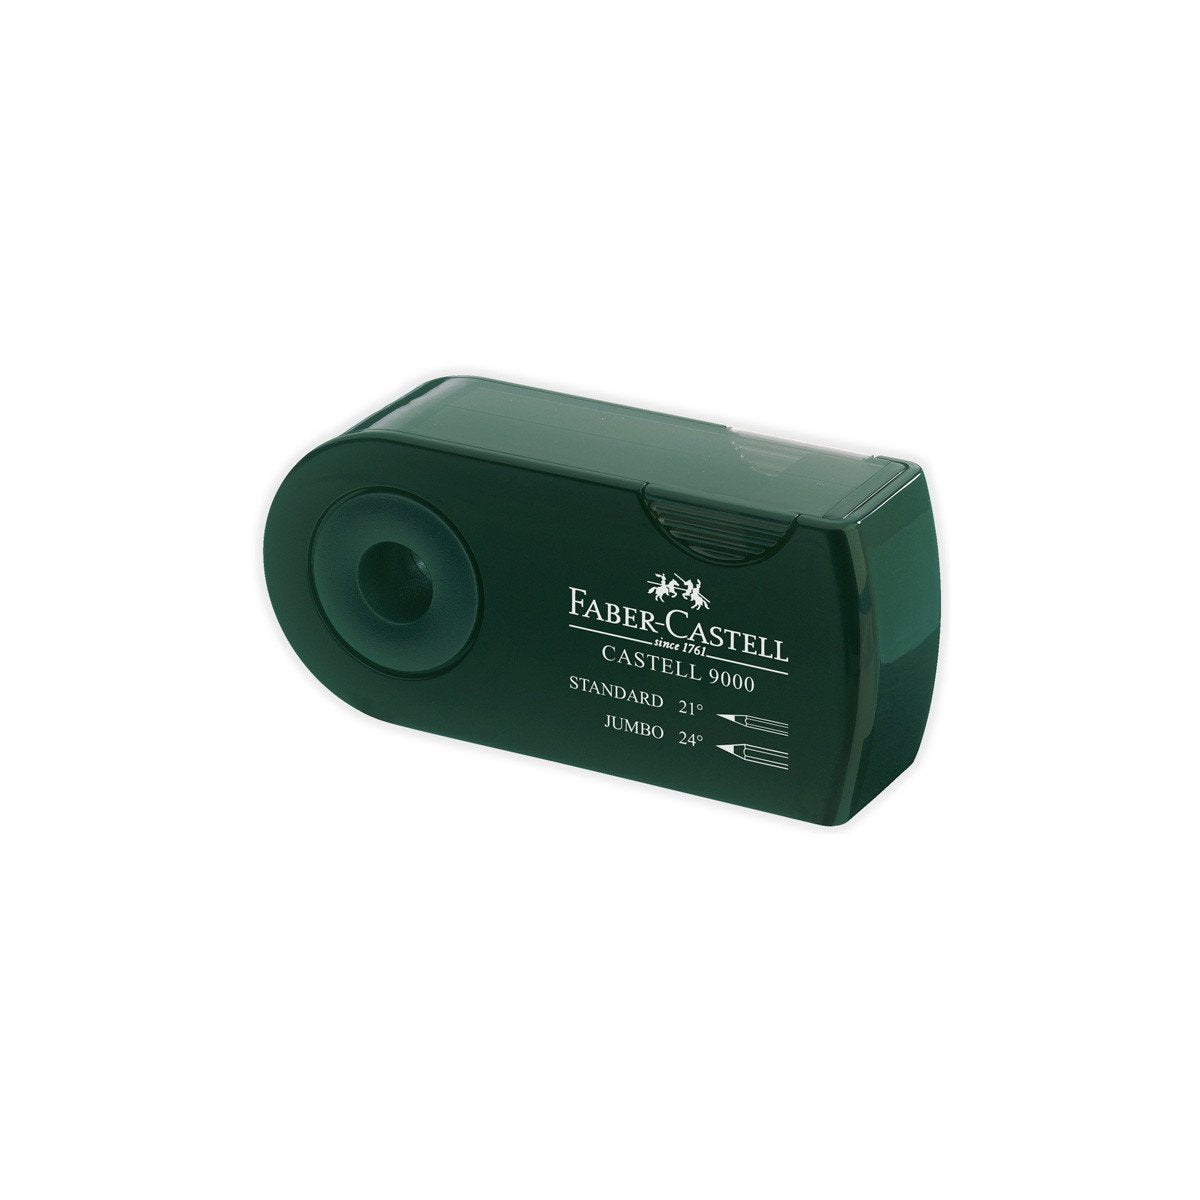 Faber-Castell Castell 9000 Double Hole Sharpener Box 